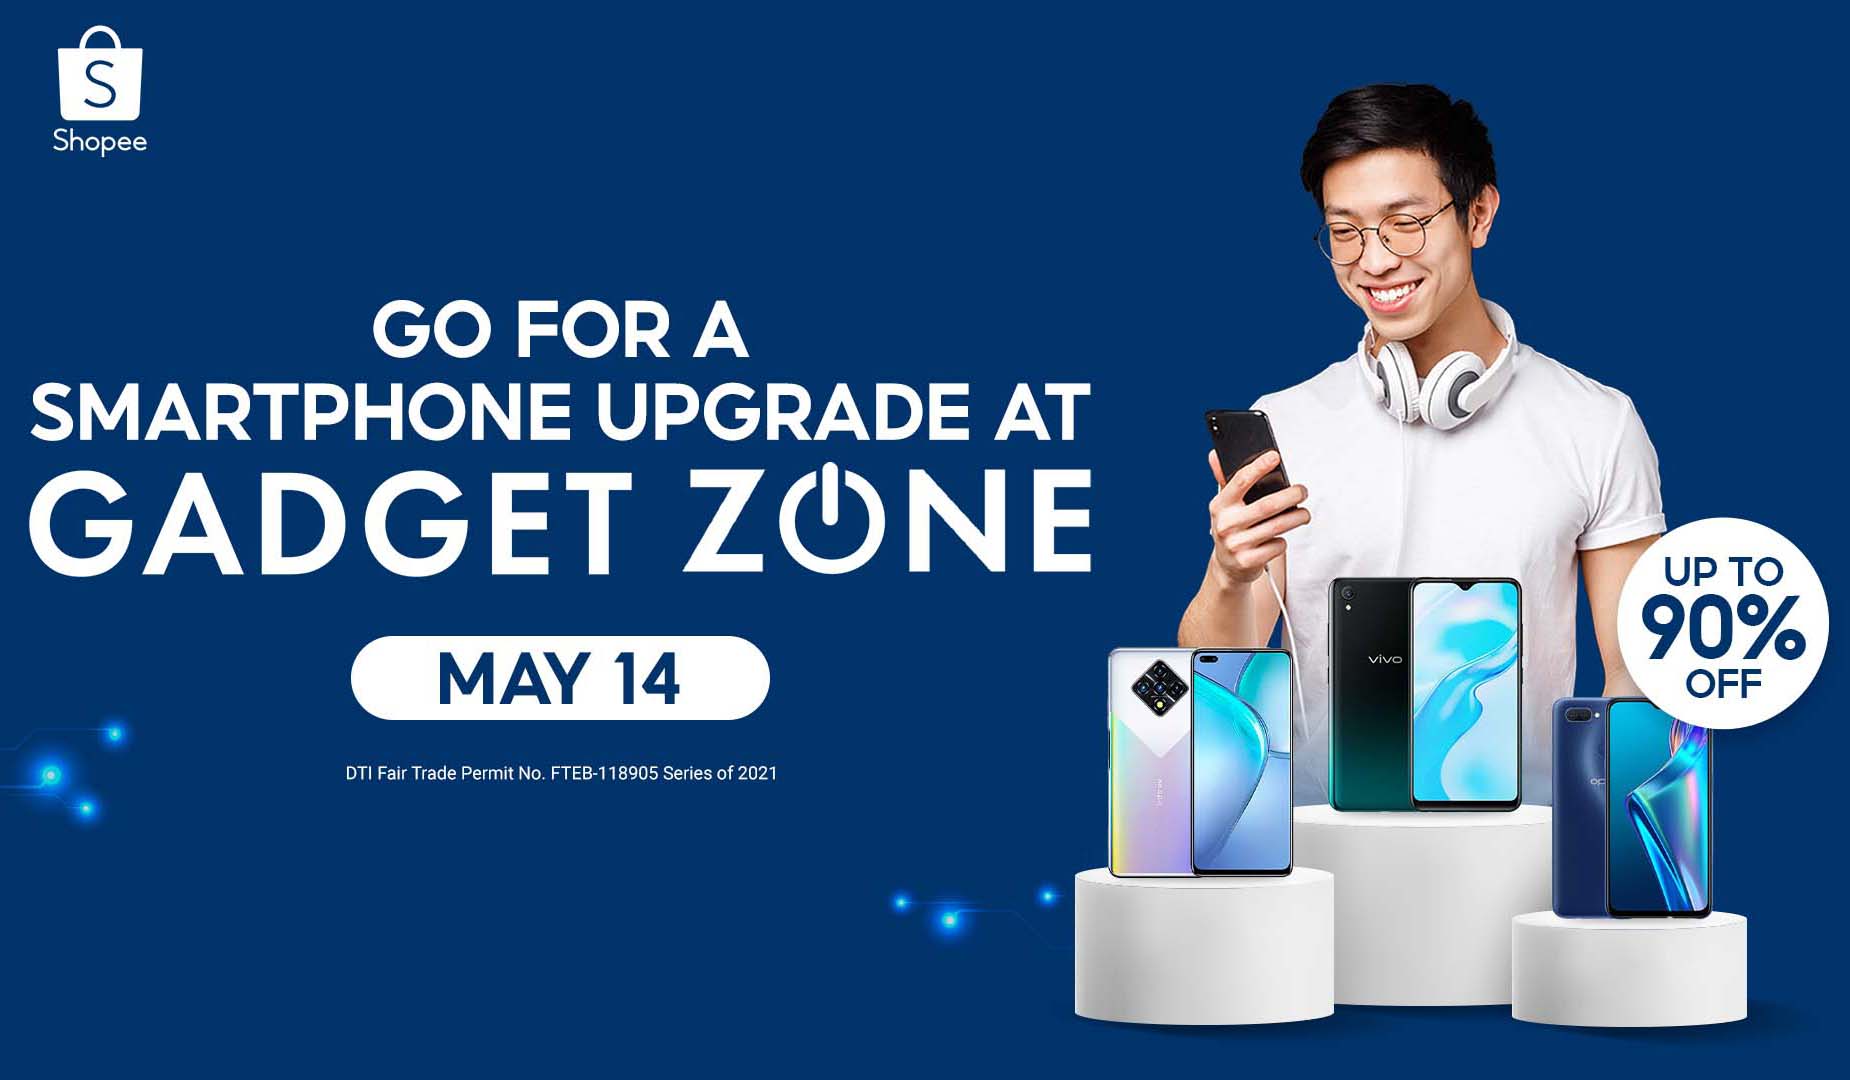 Upgrade to these Affordable Smartphones at Shopee’s Gadget Zone